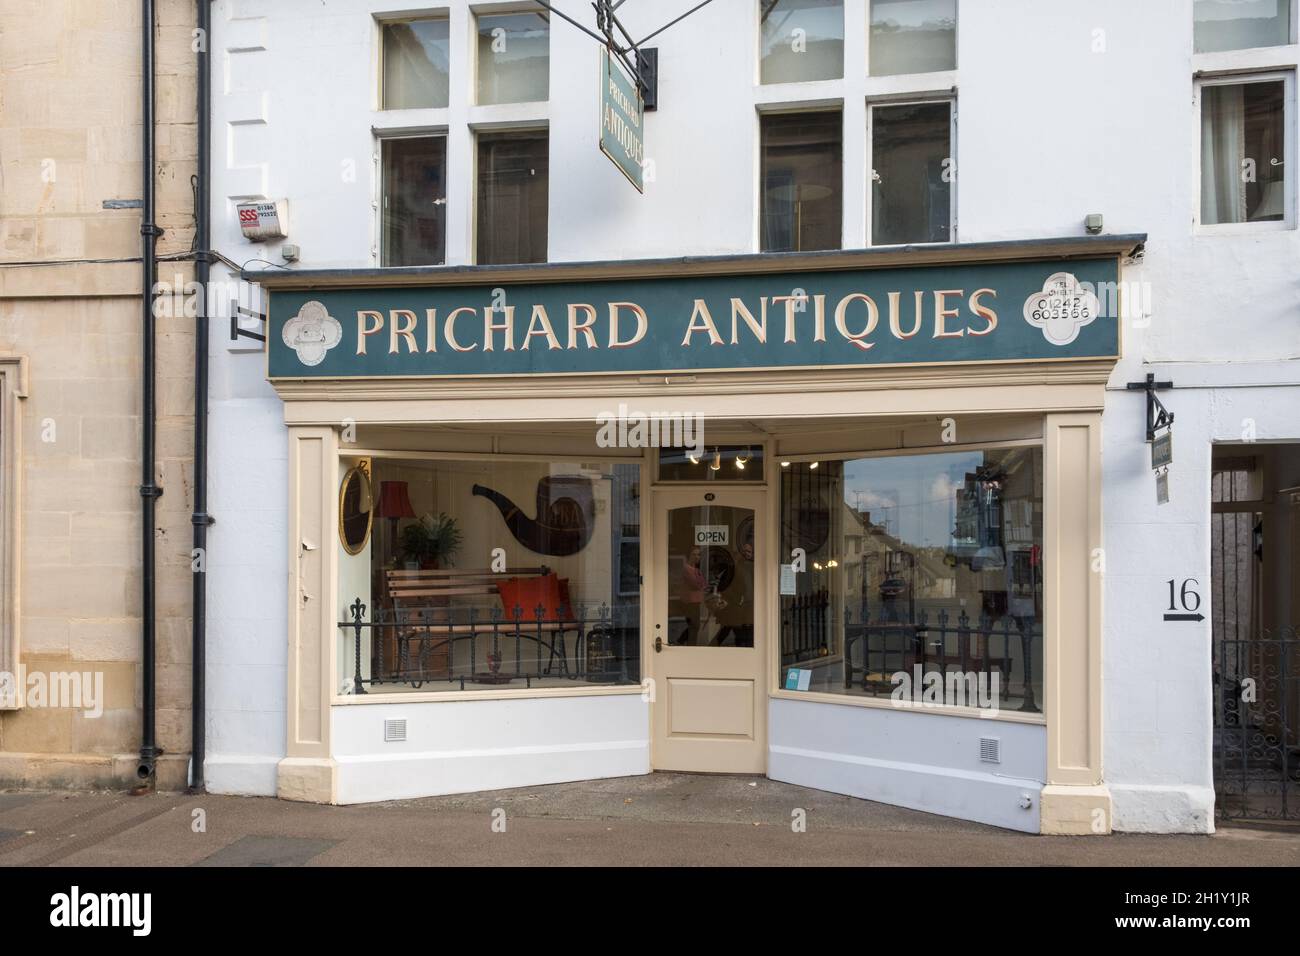 Prichard Antiques shop in Winchcombe High Street, Cotswolds, Gloucestershire Stock Photo